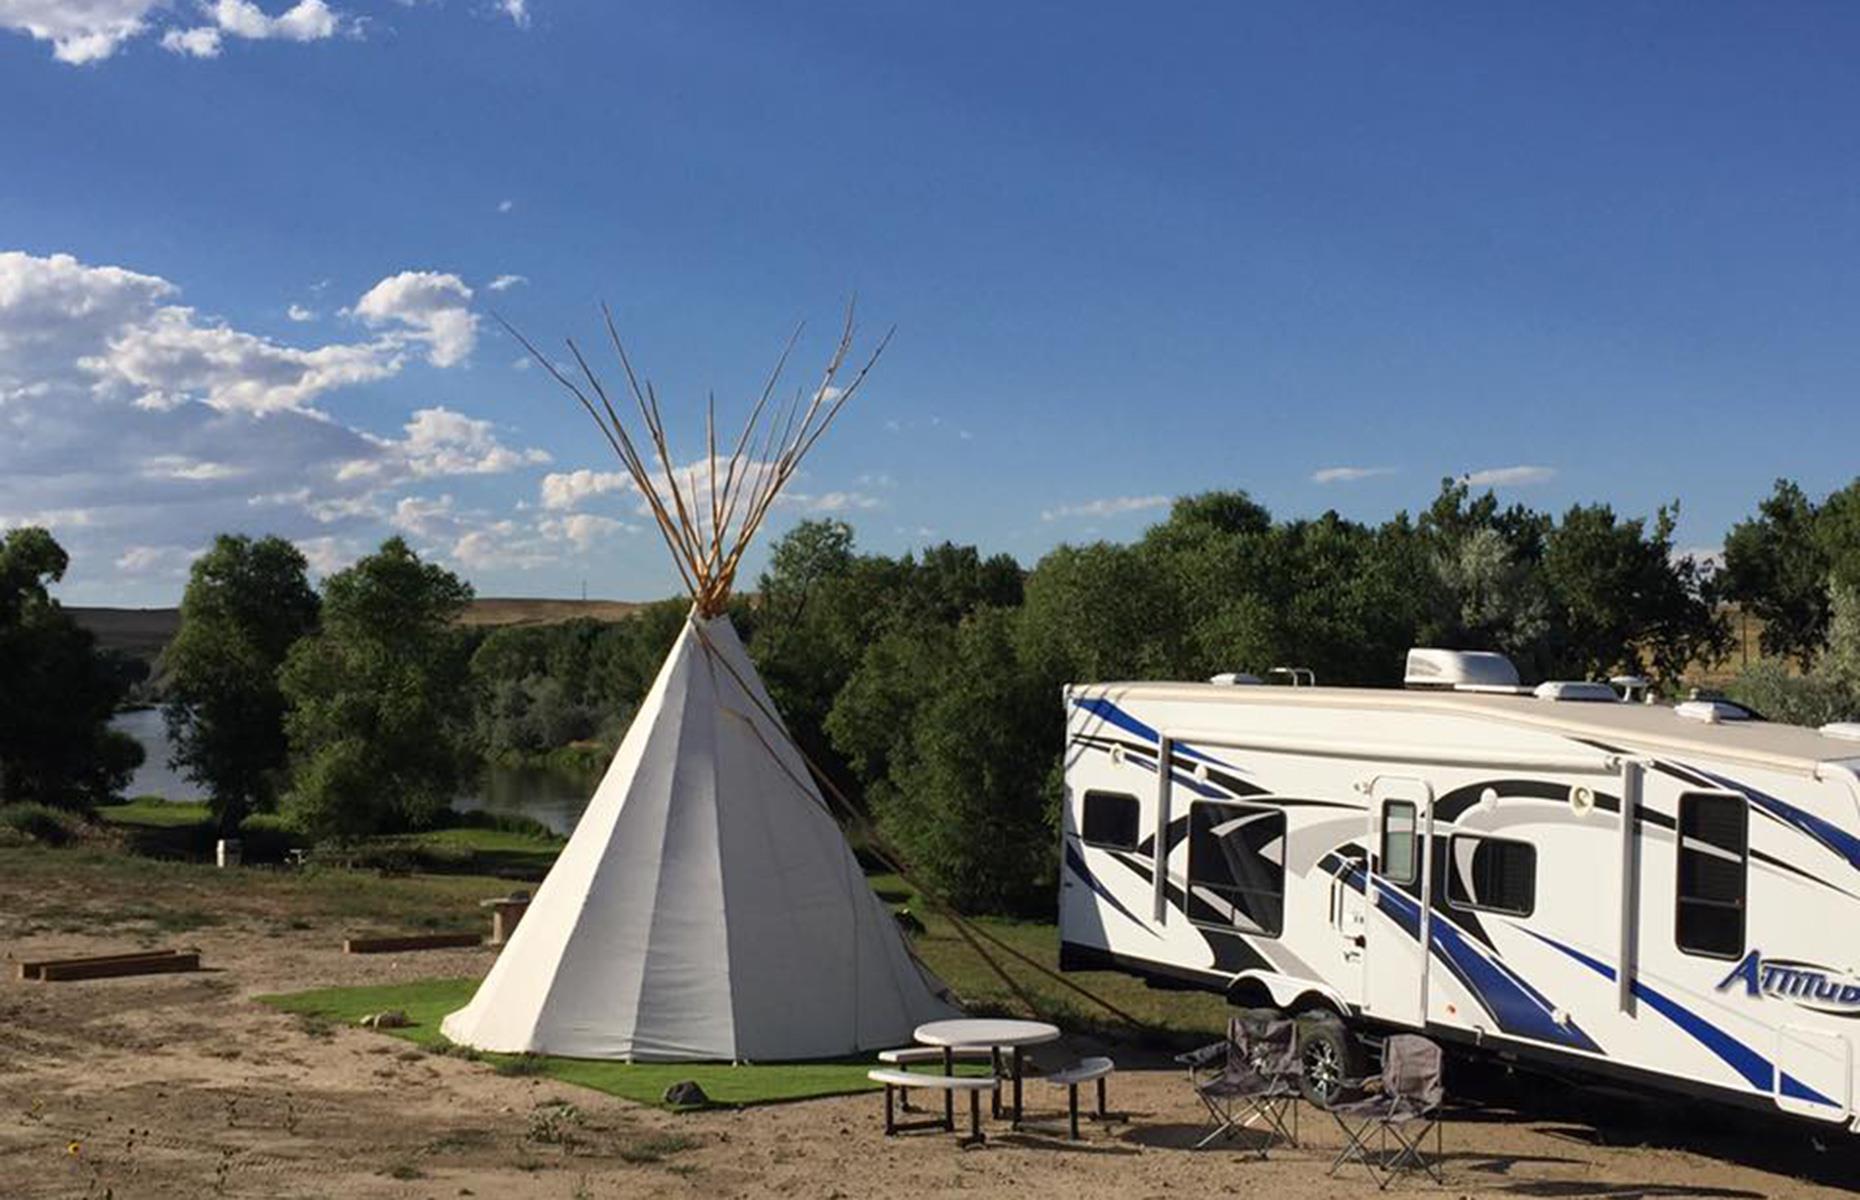 <p>As the name suggests <a href="http://www.riversedgervresort.net/">this upmarket spot</a> is located on the Platte River, just east of Casper. It's open year-round and offers excellent facilities including a kid's playground, full hook-up, TV and Wi-Fi with space for 73 RVs in total. RVers can get involved in outdoor activities from trout fishing to skiing and golf, plus there are cabins available too. </p>